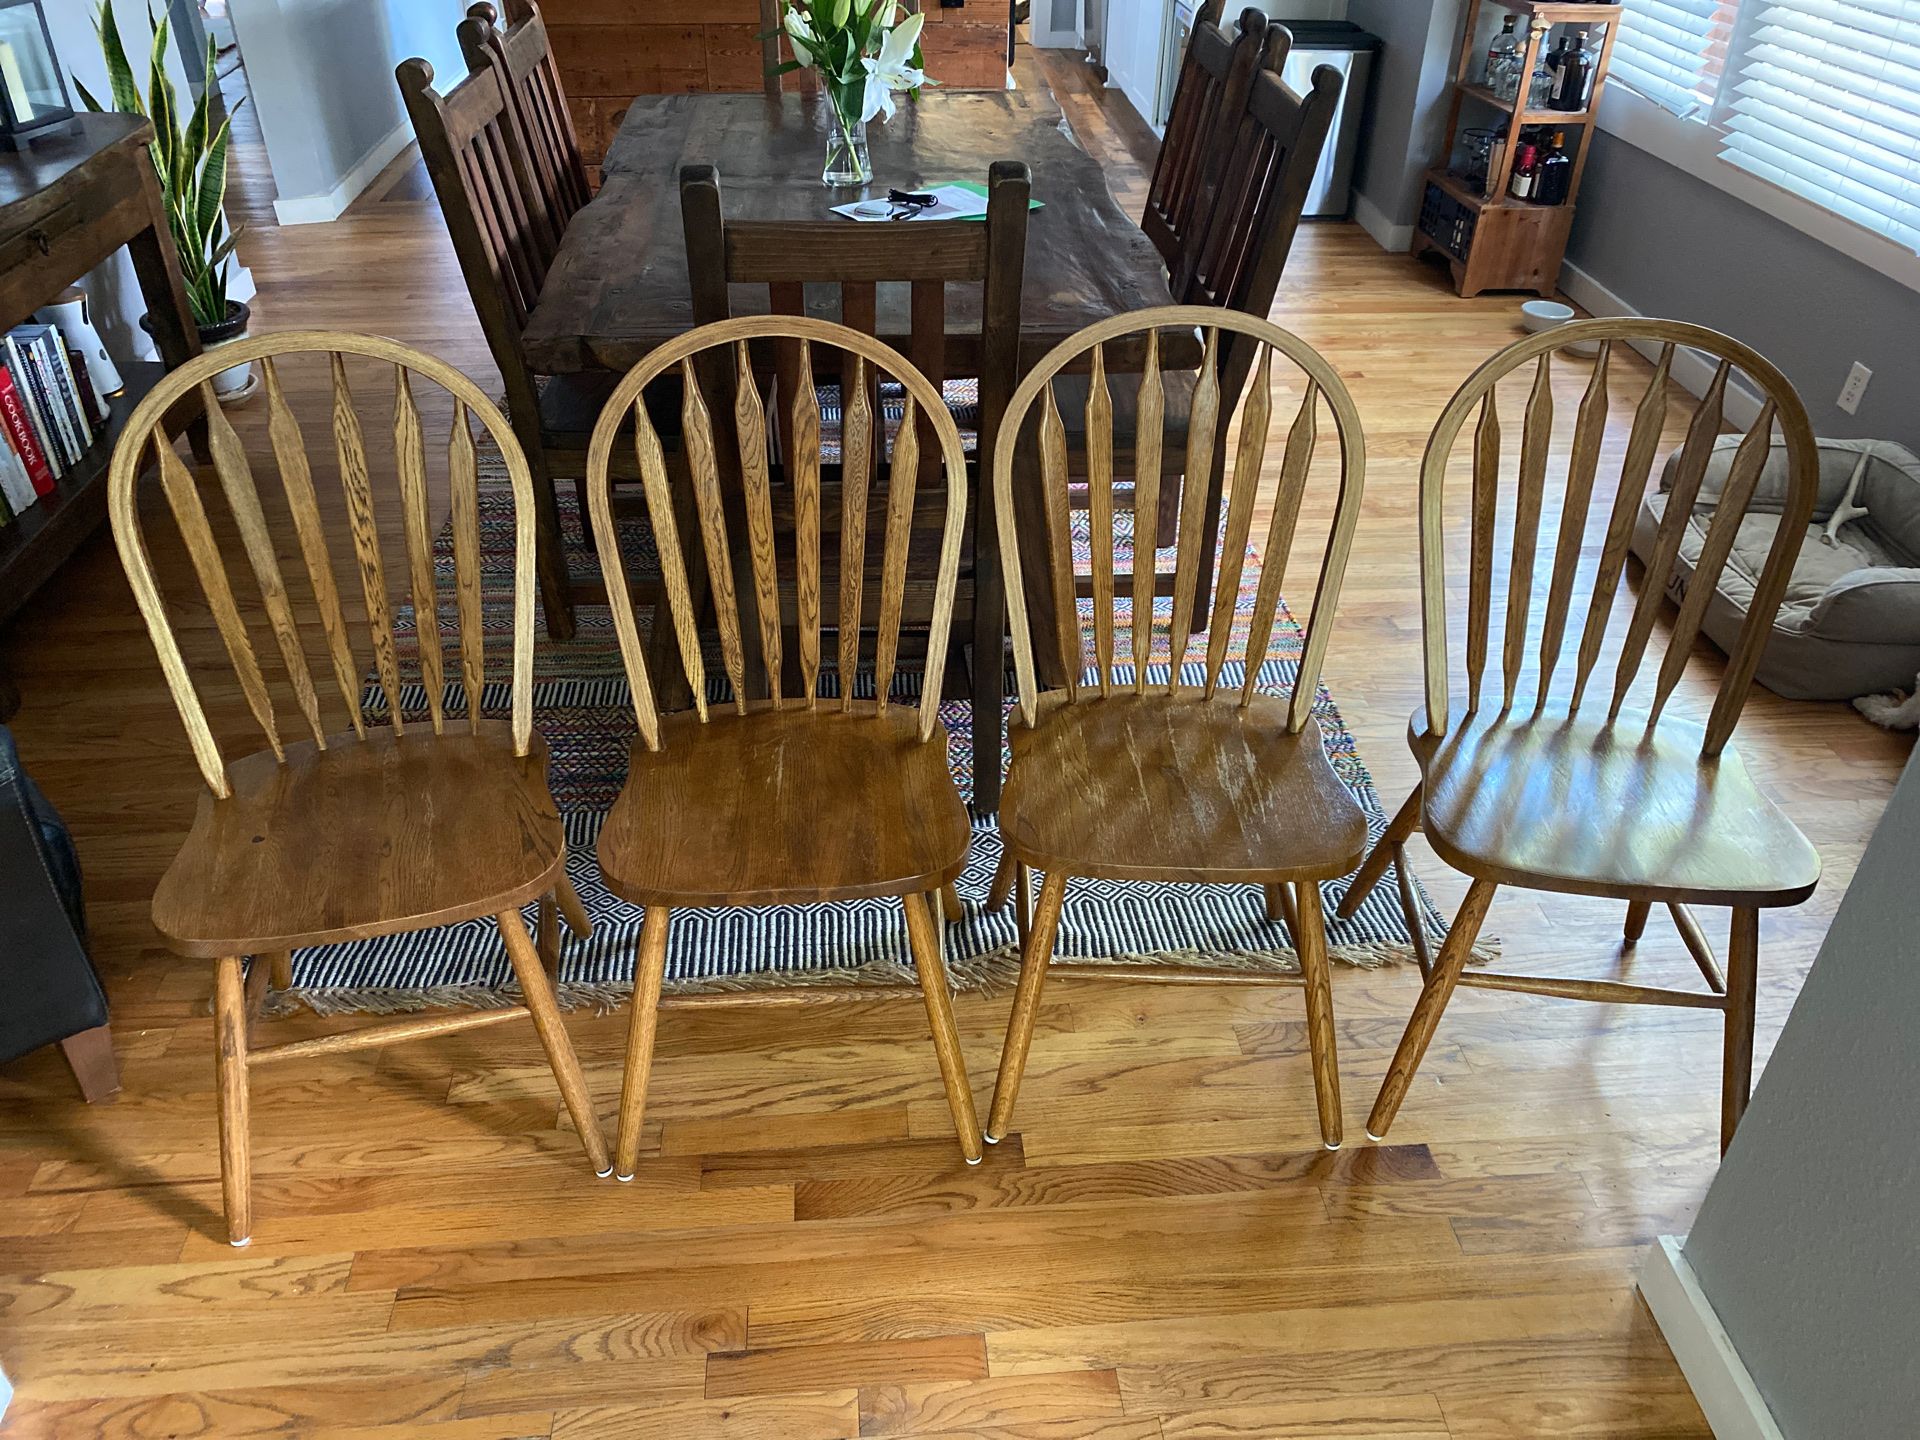 Dining Chairs (4 of them)